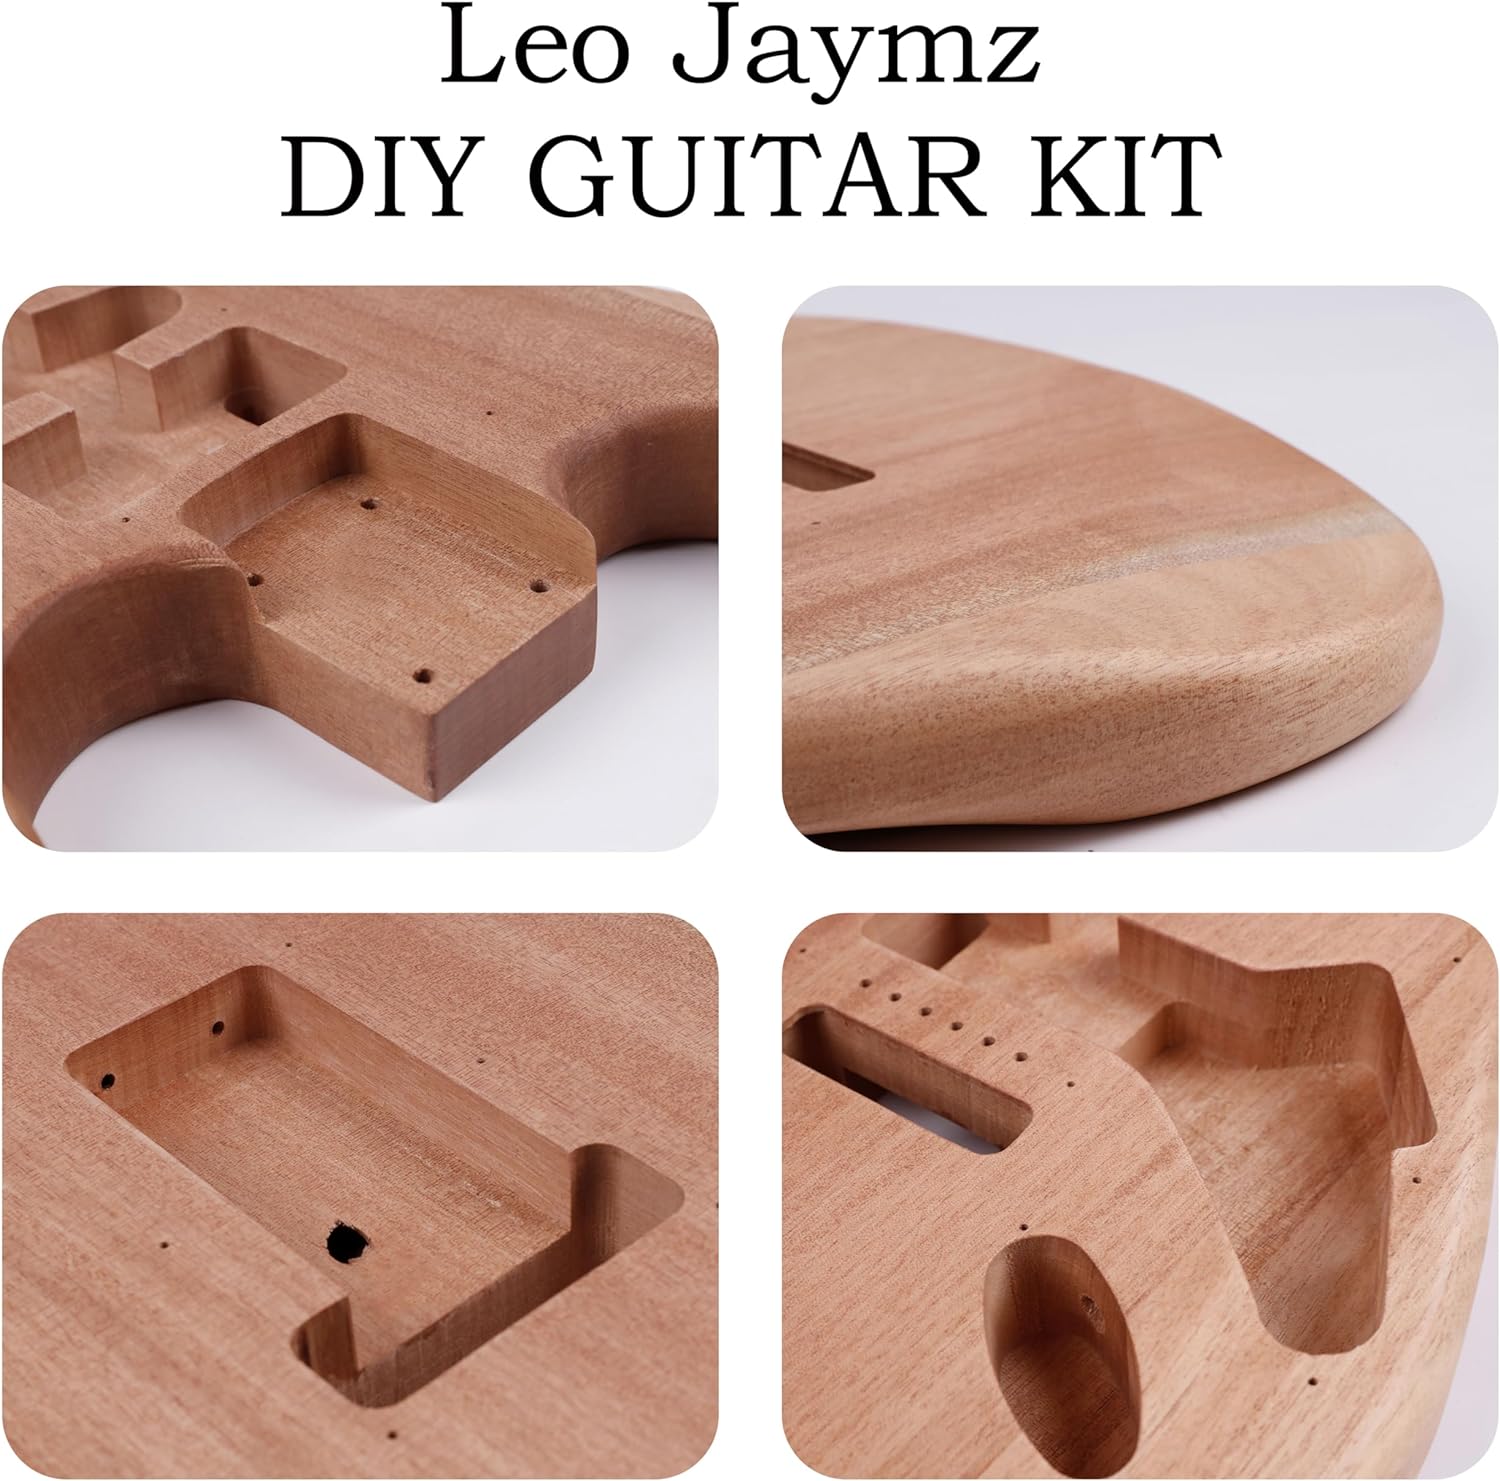 Leo Jaymz DIY ST Style Electric Guitar Kits with Mahogany Body and Maple Neck - Rosewood Fingerboard and All Components Included - image 3 of 6